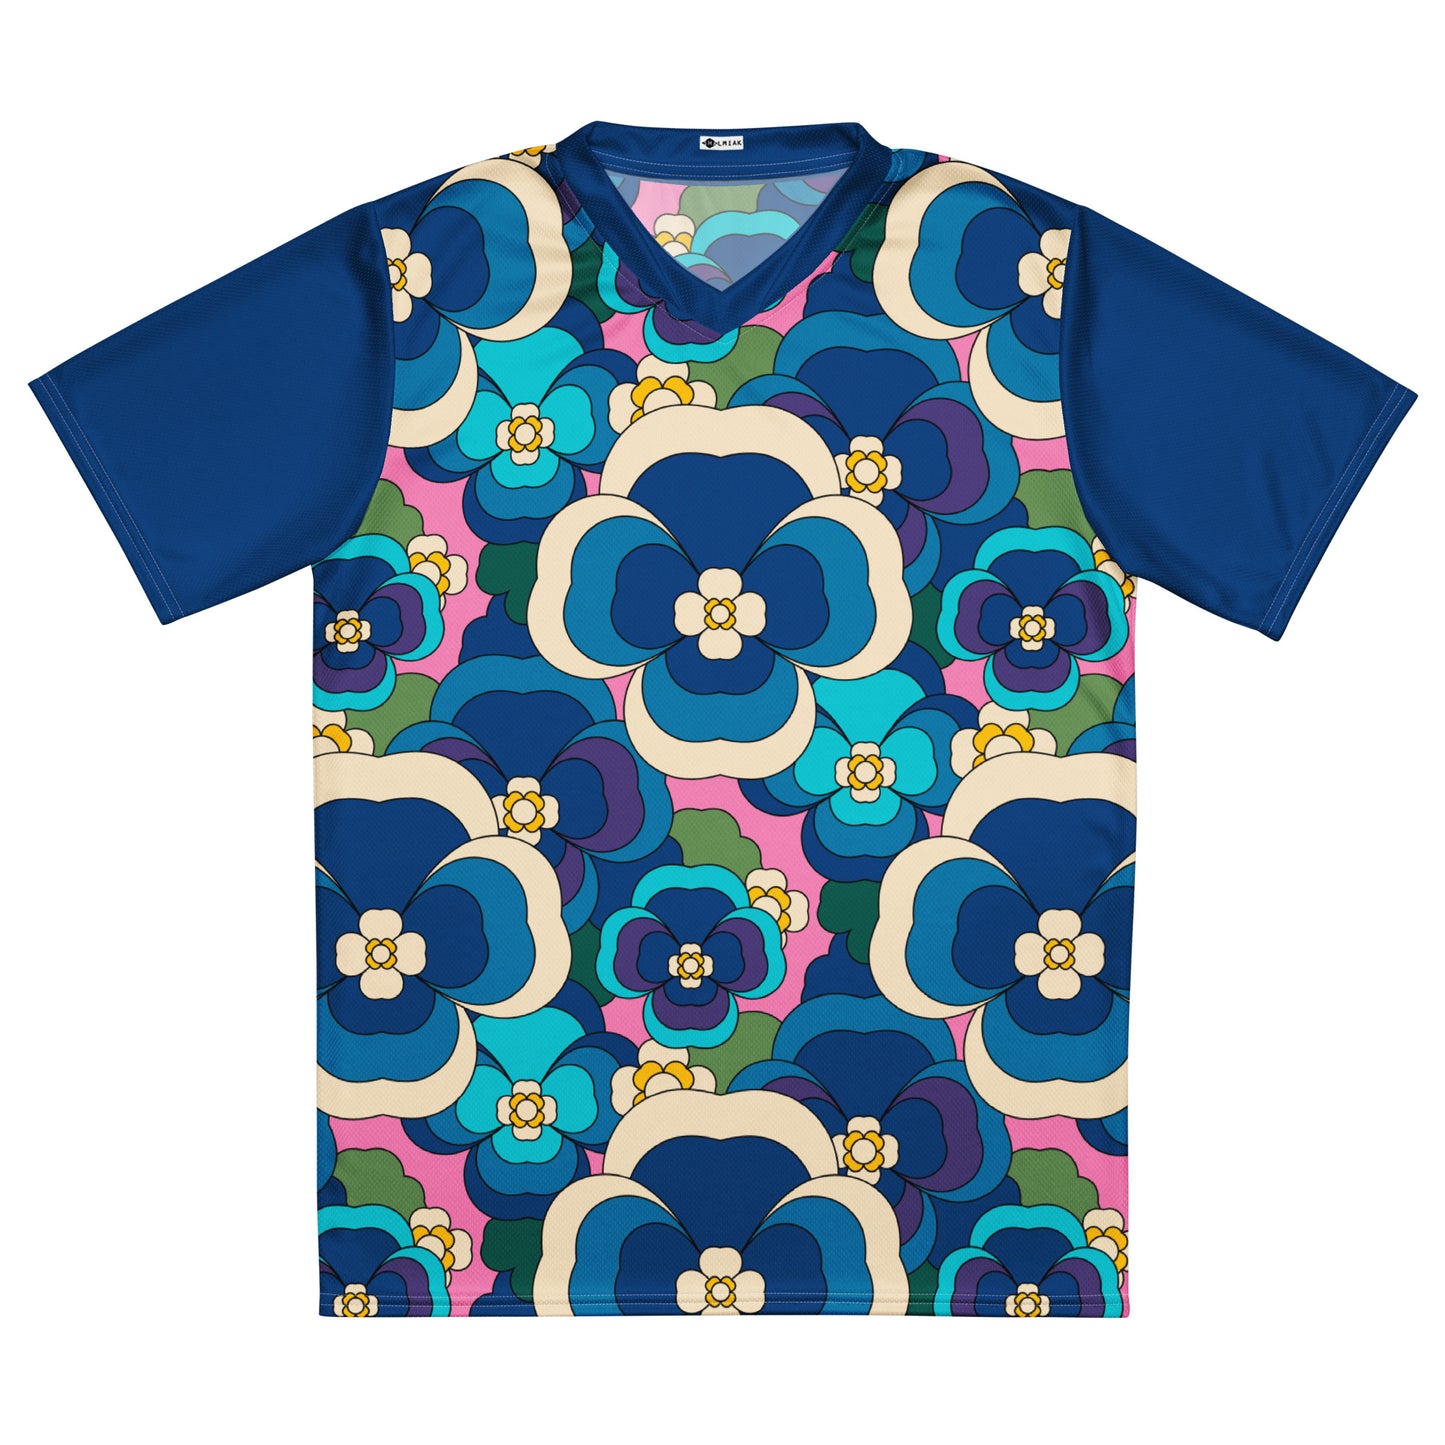 PANSY FANTASY blue pink - Recycled unisex sports jersey